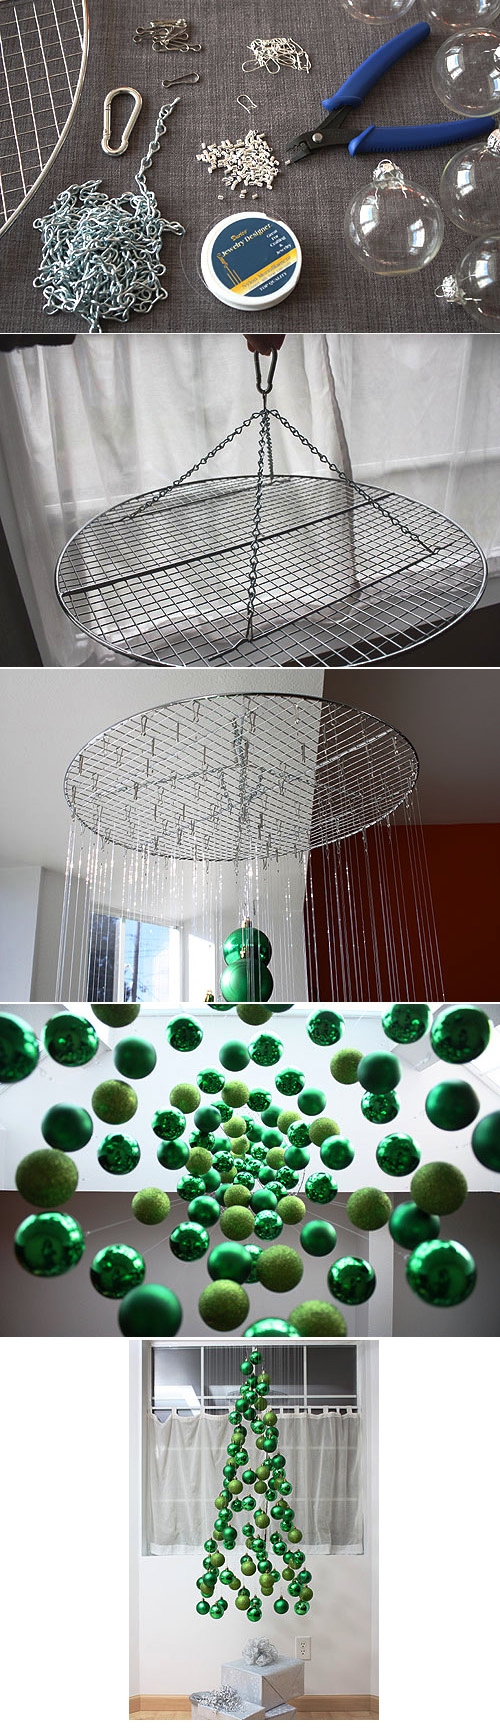 create-a-hanging-ornament-structure-that-resembles-a-tree